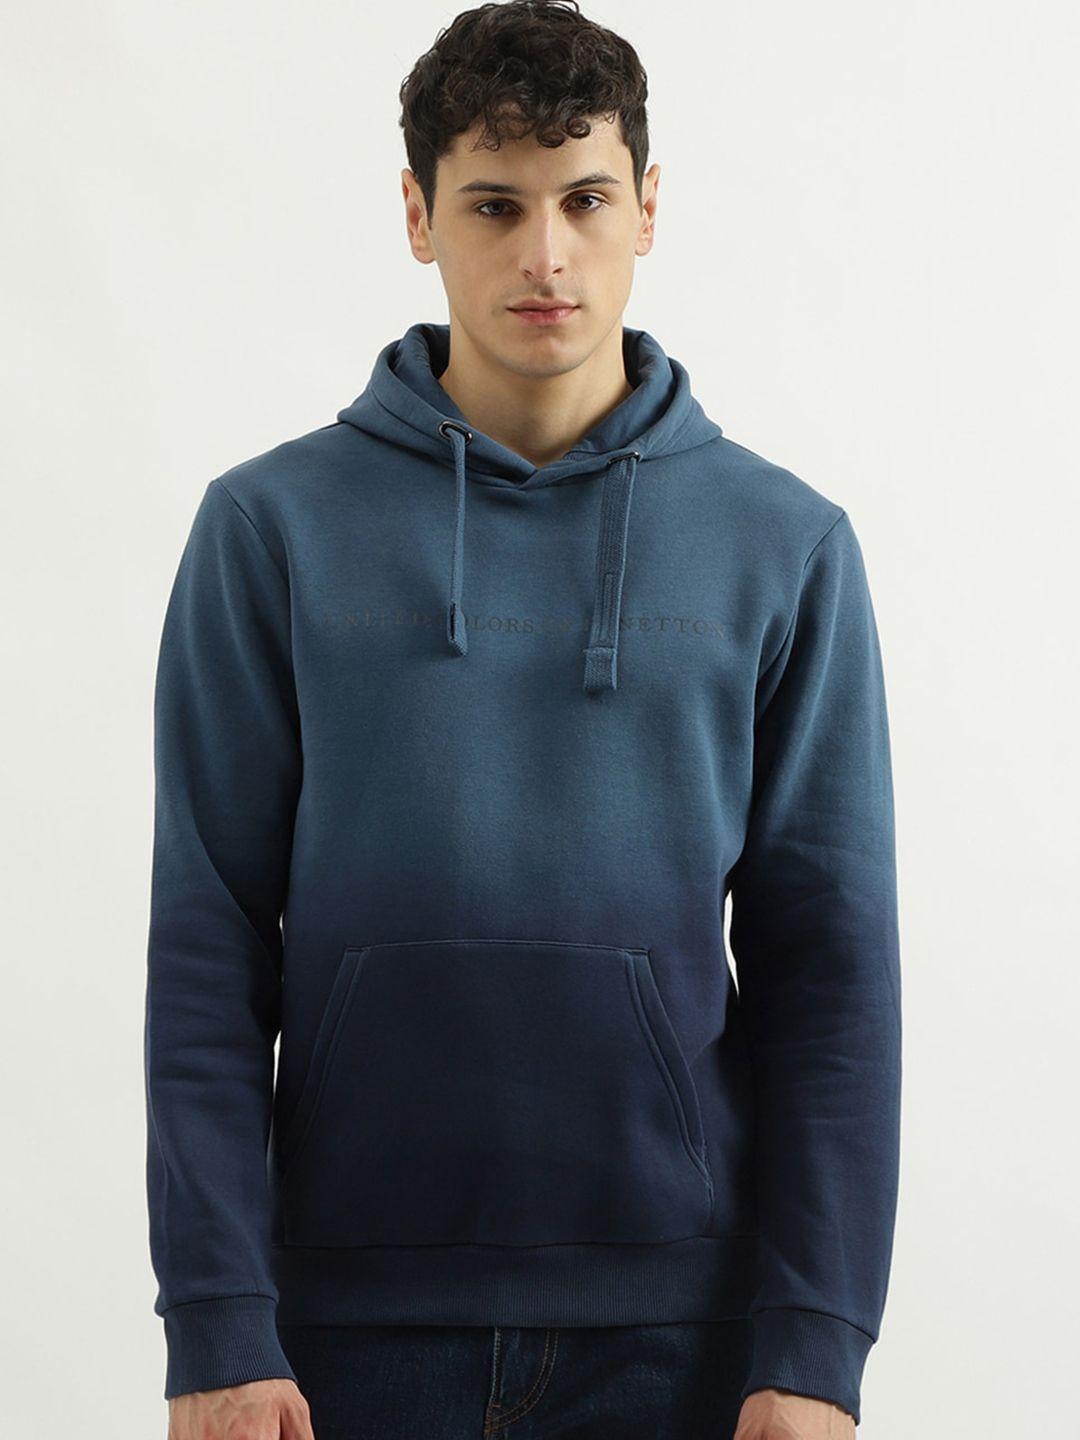 united-colors-of-benetton-hooded-pullover-sweatshirt